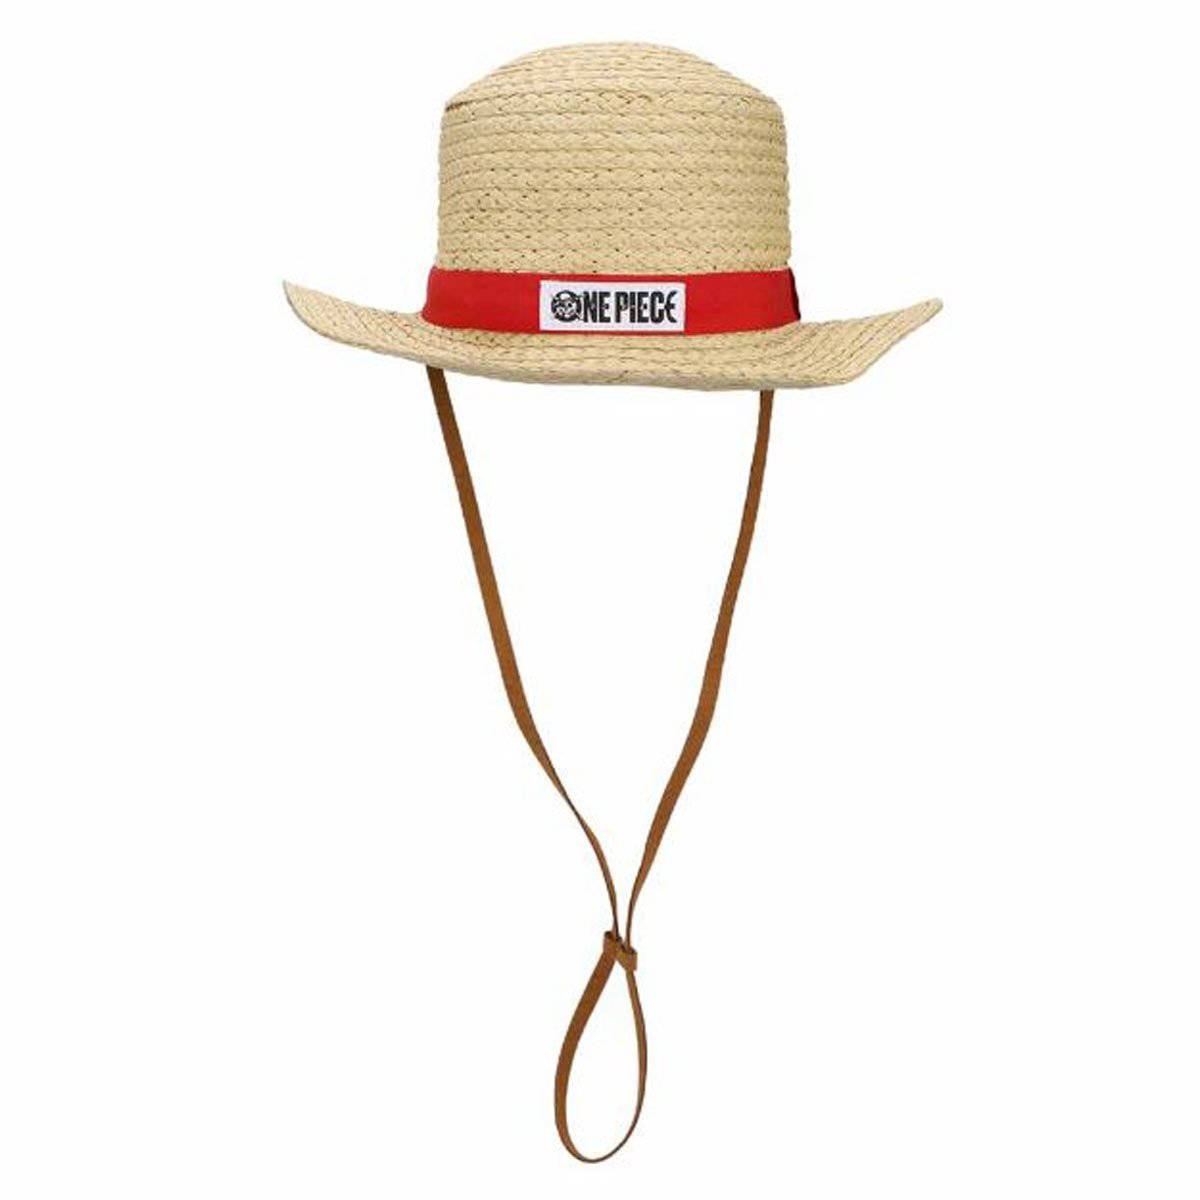 Buy Luffy's Replica Straw Hat from One Piece (Free Shipping